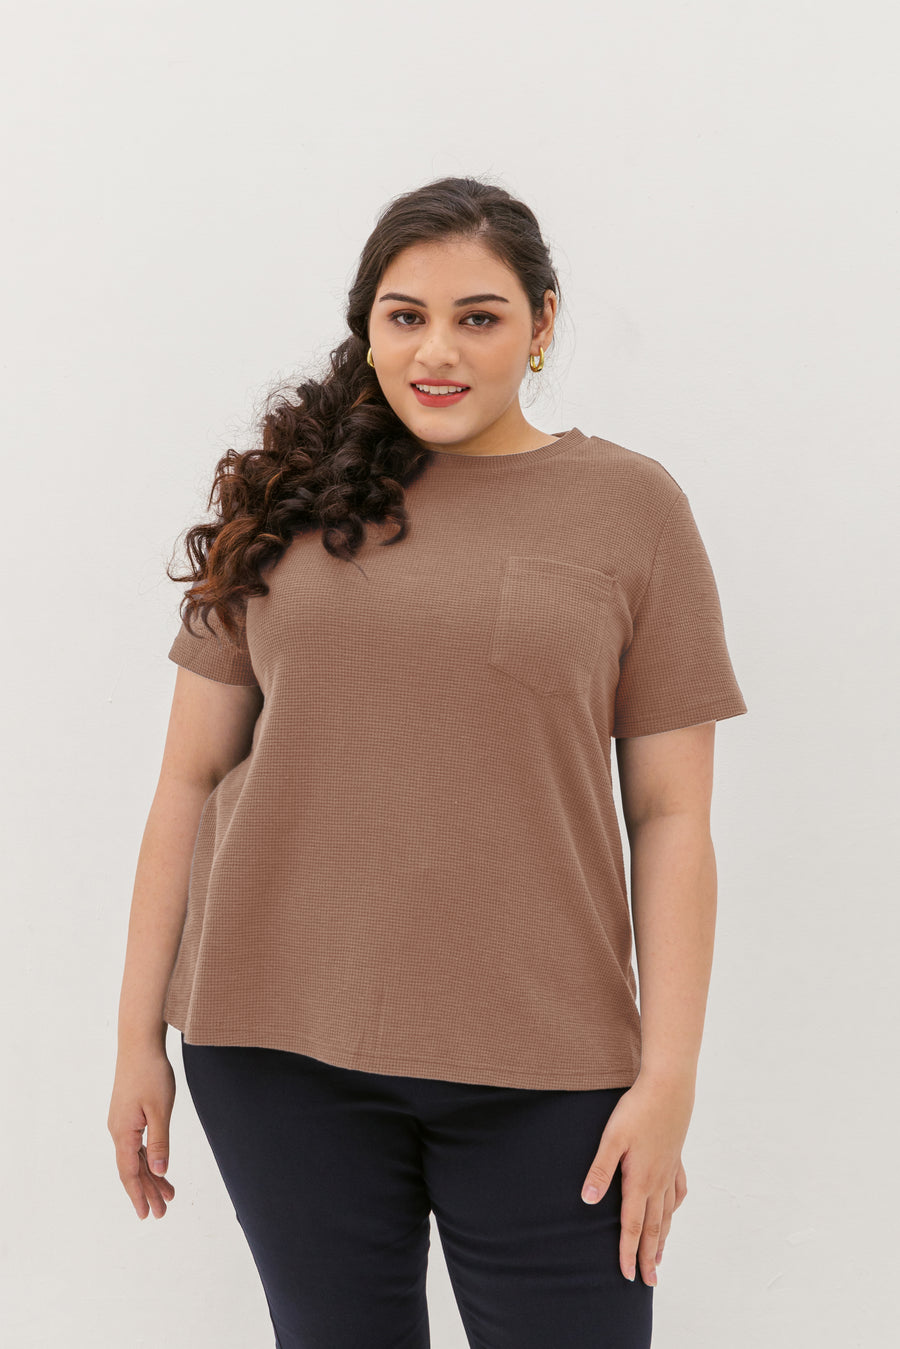 Khloe Waffle Knit T-Shirt In Light Brown